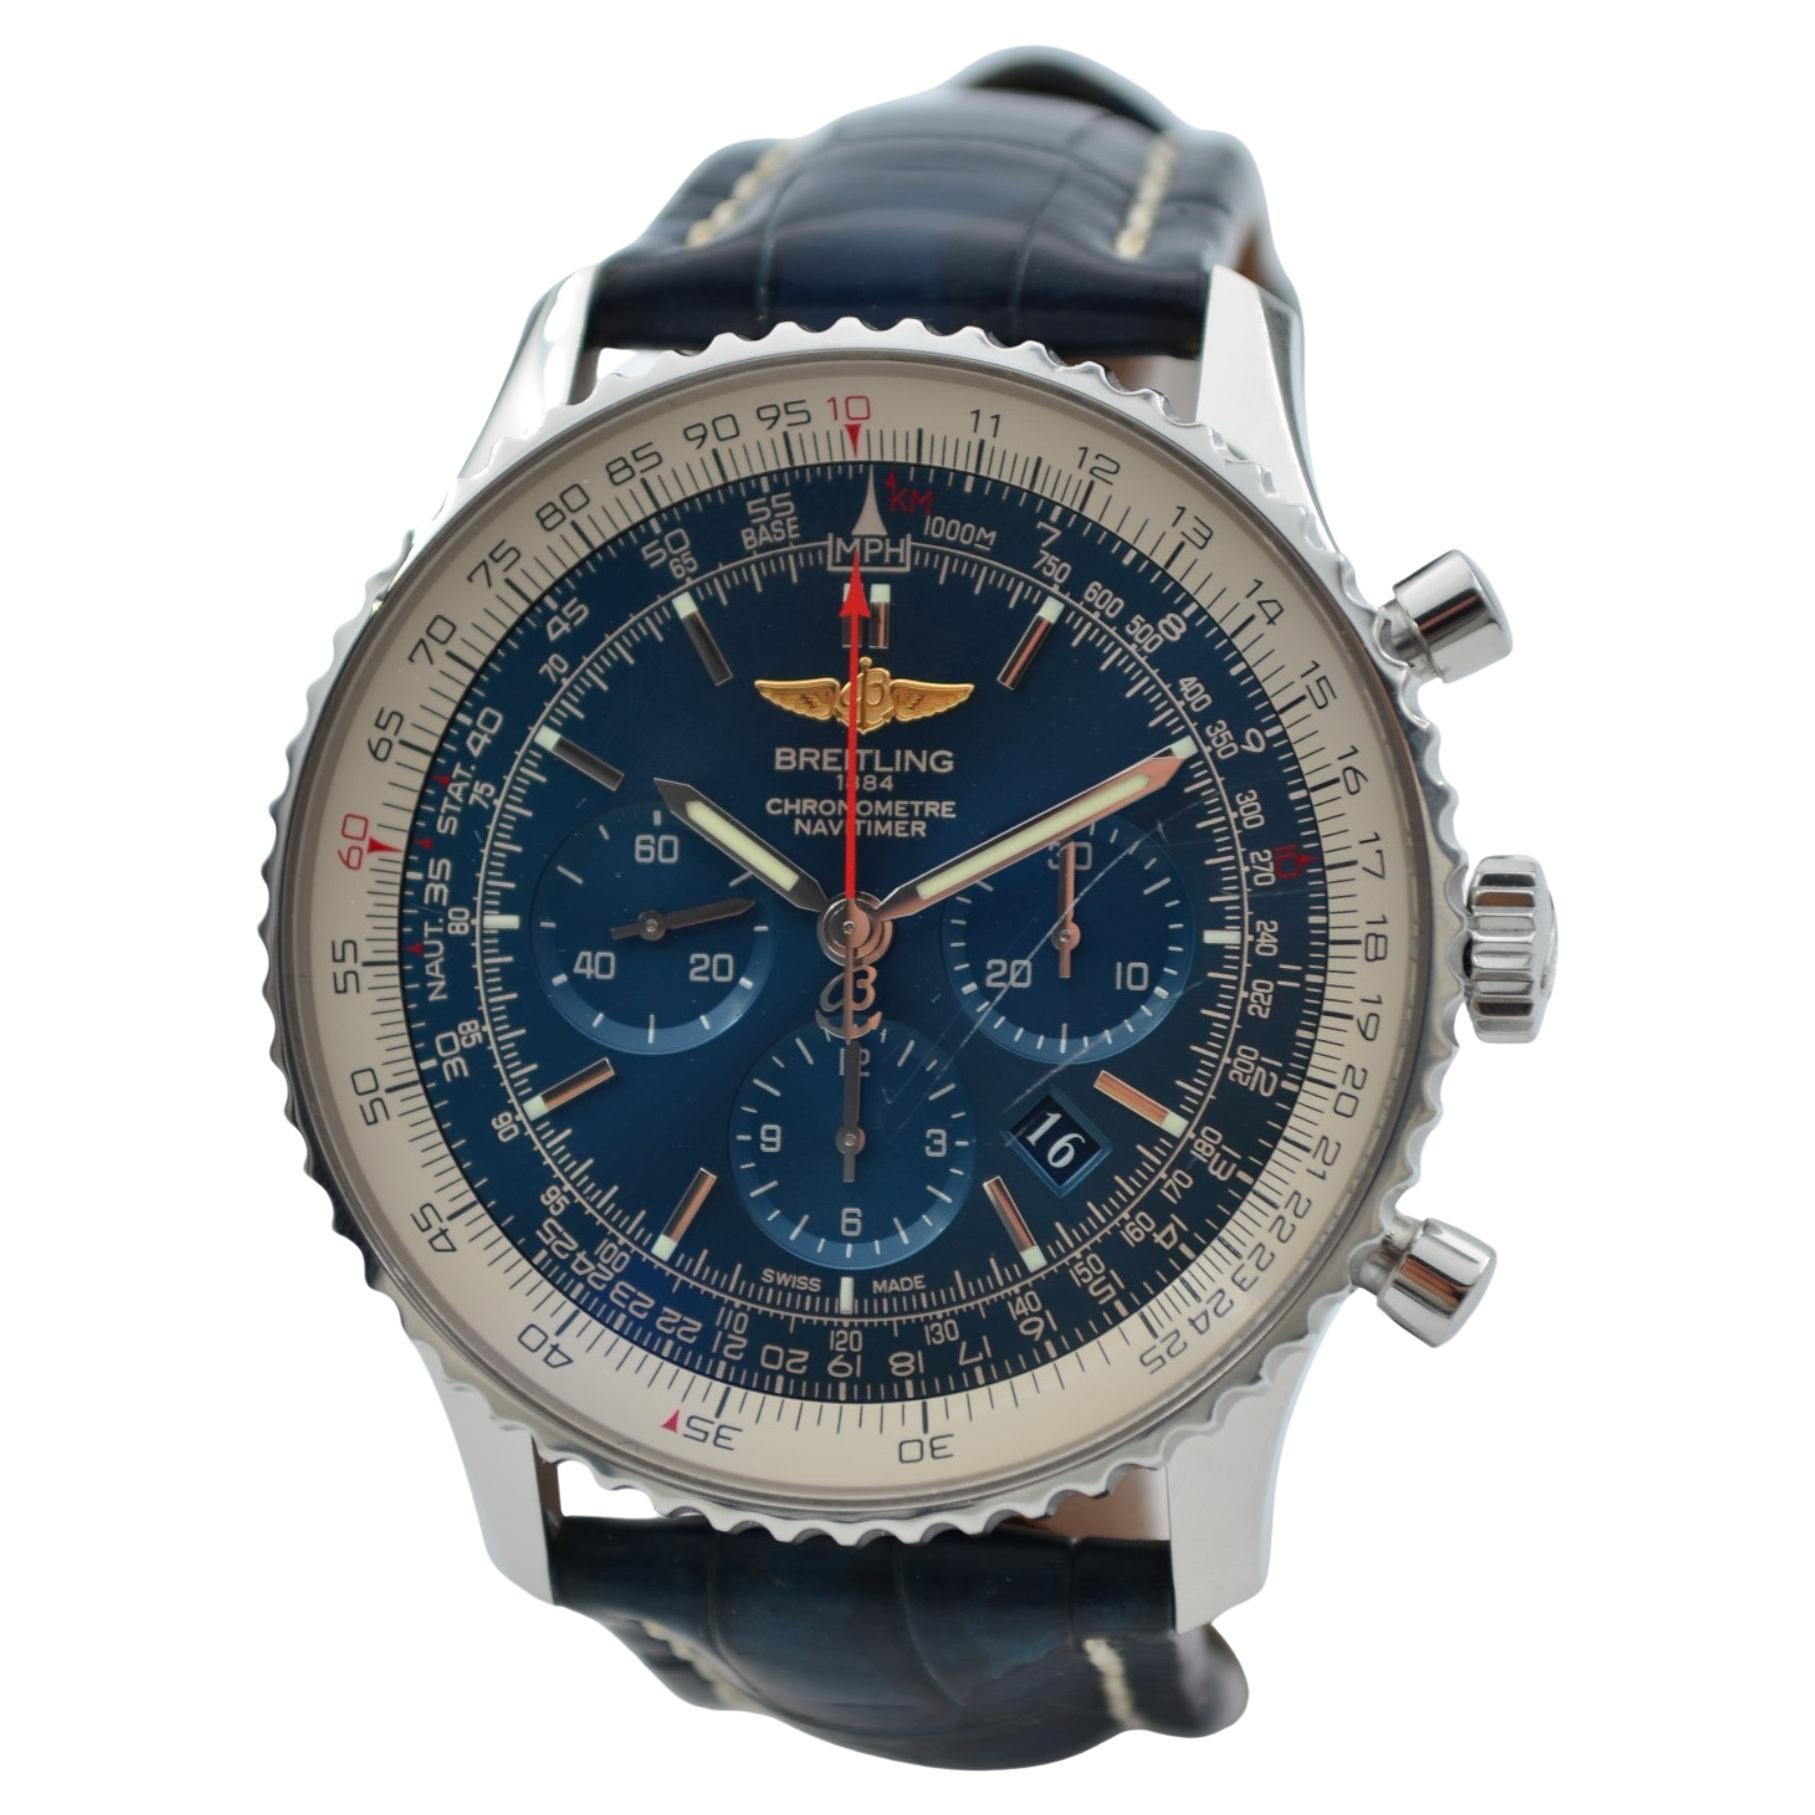 Breitling Navitimer 1 Chronograph 46mm Steel Blue Dial Leather Strap AB012721 For Sale